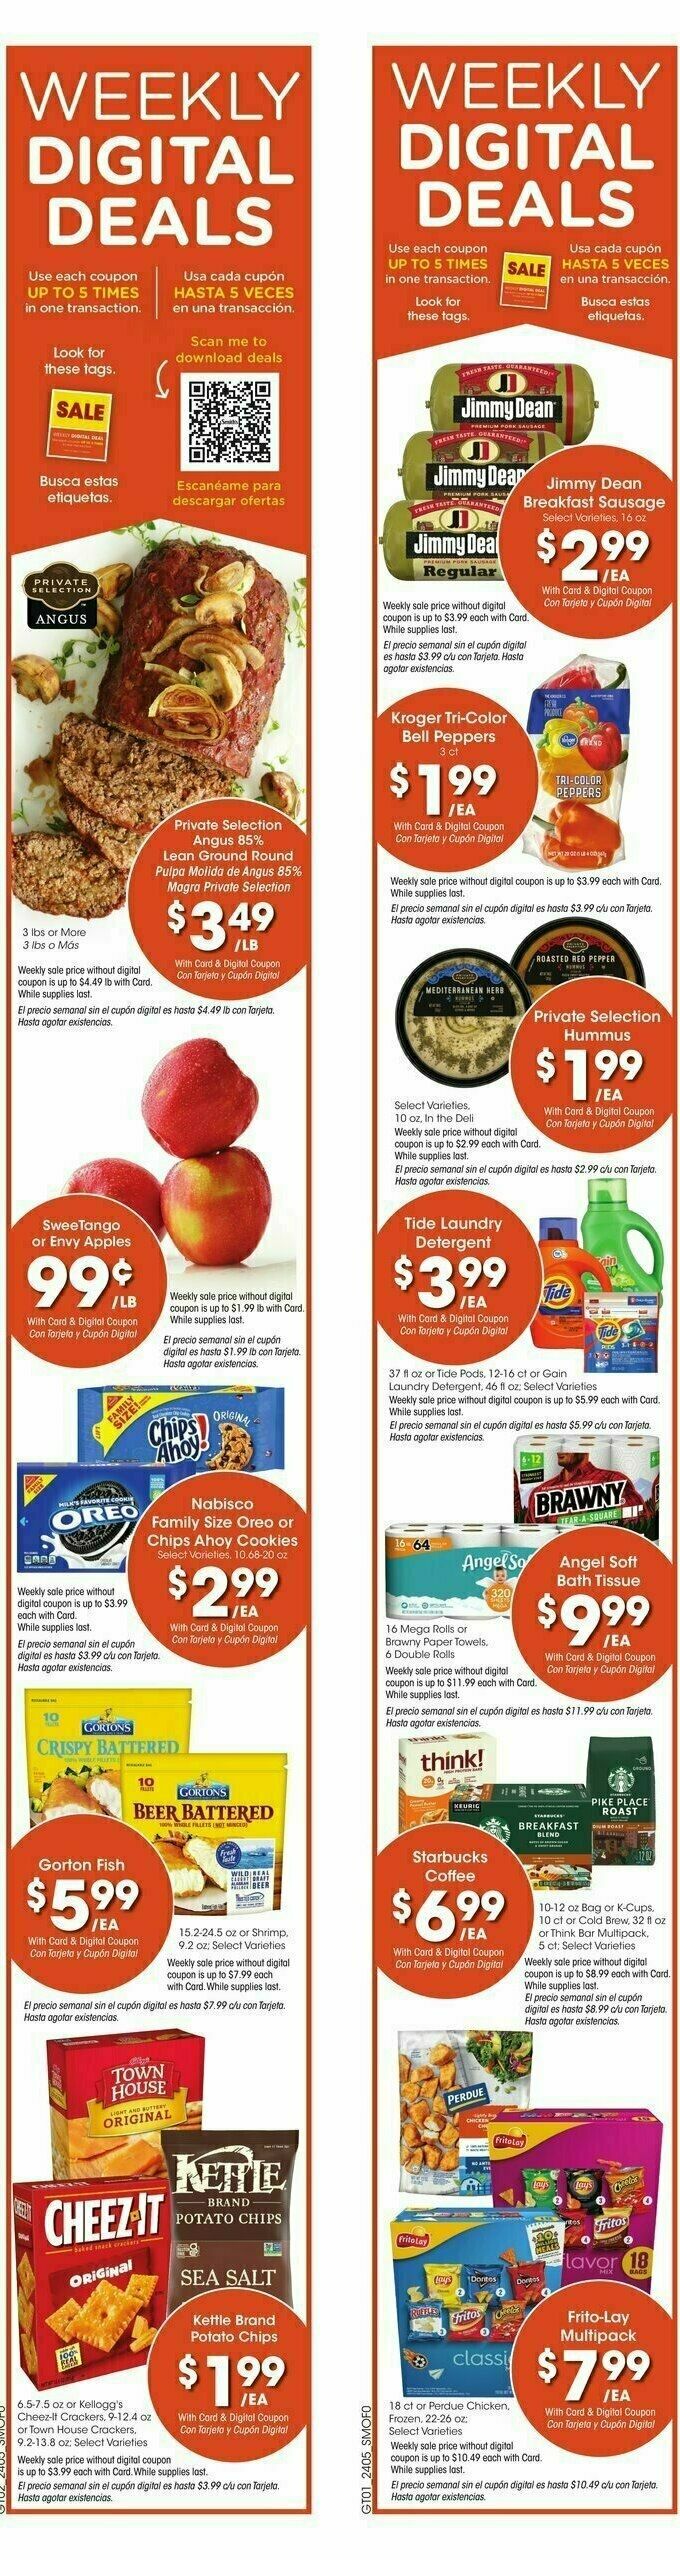 Smith's Weekly Ad from March 6